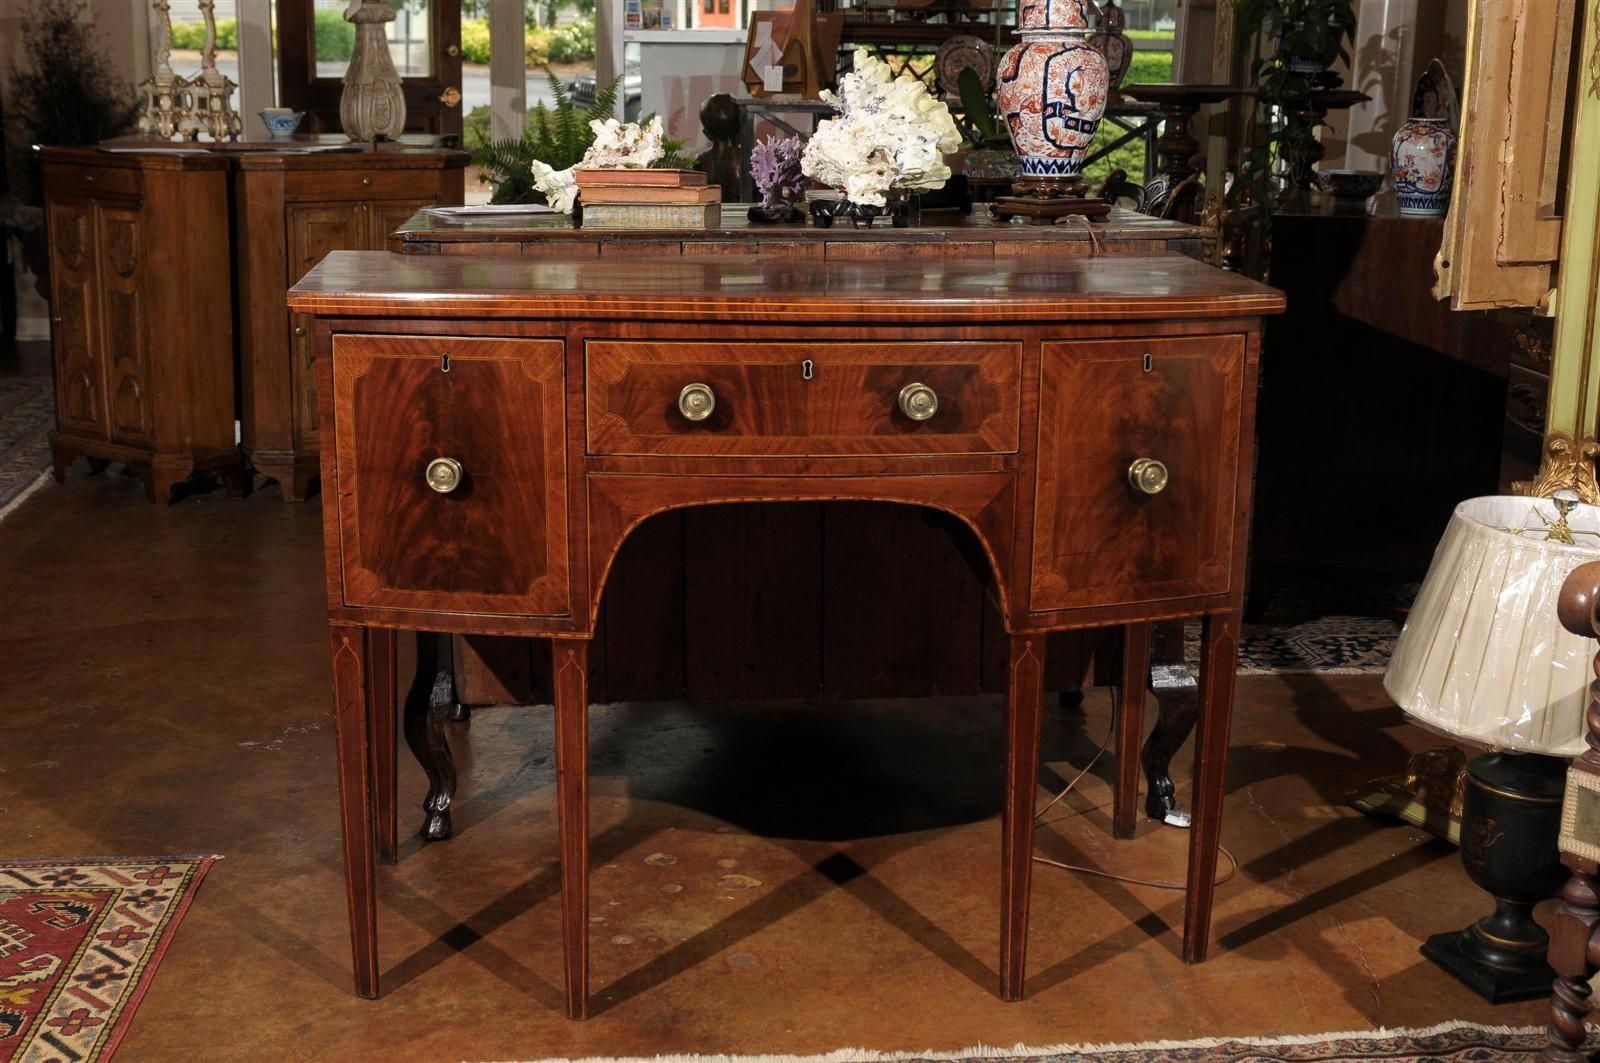 This sideboard has a shaped top over conforming case with a center drawer and two deep side drawers. Tapered legs, line inlay and quadrant corners.